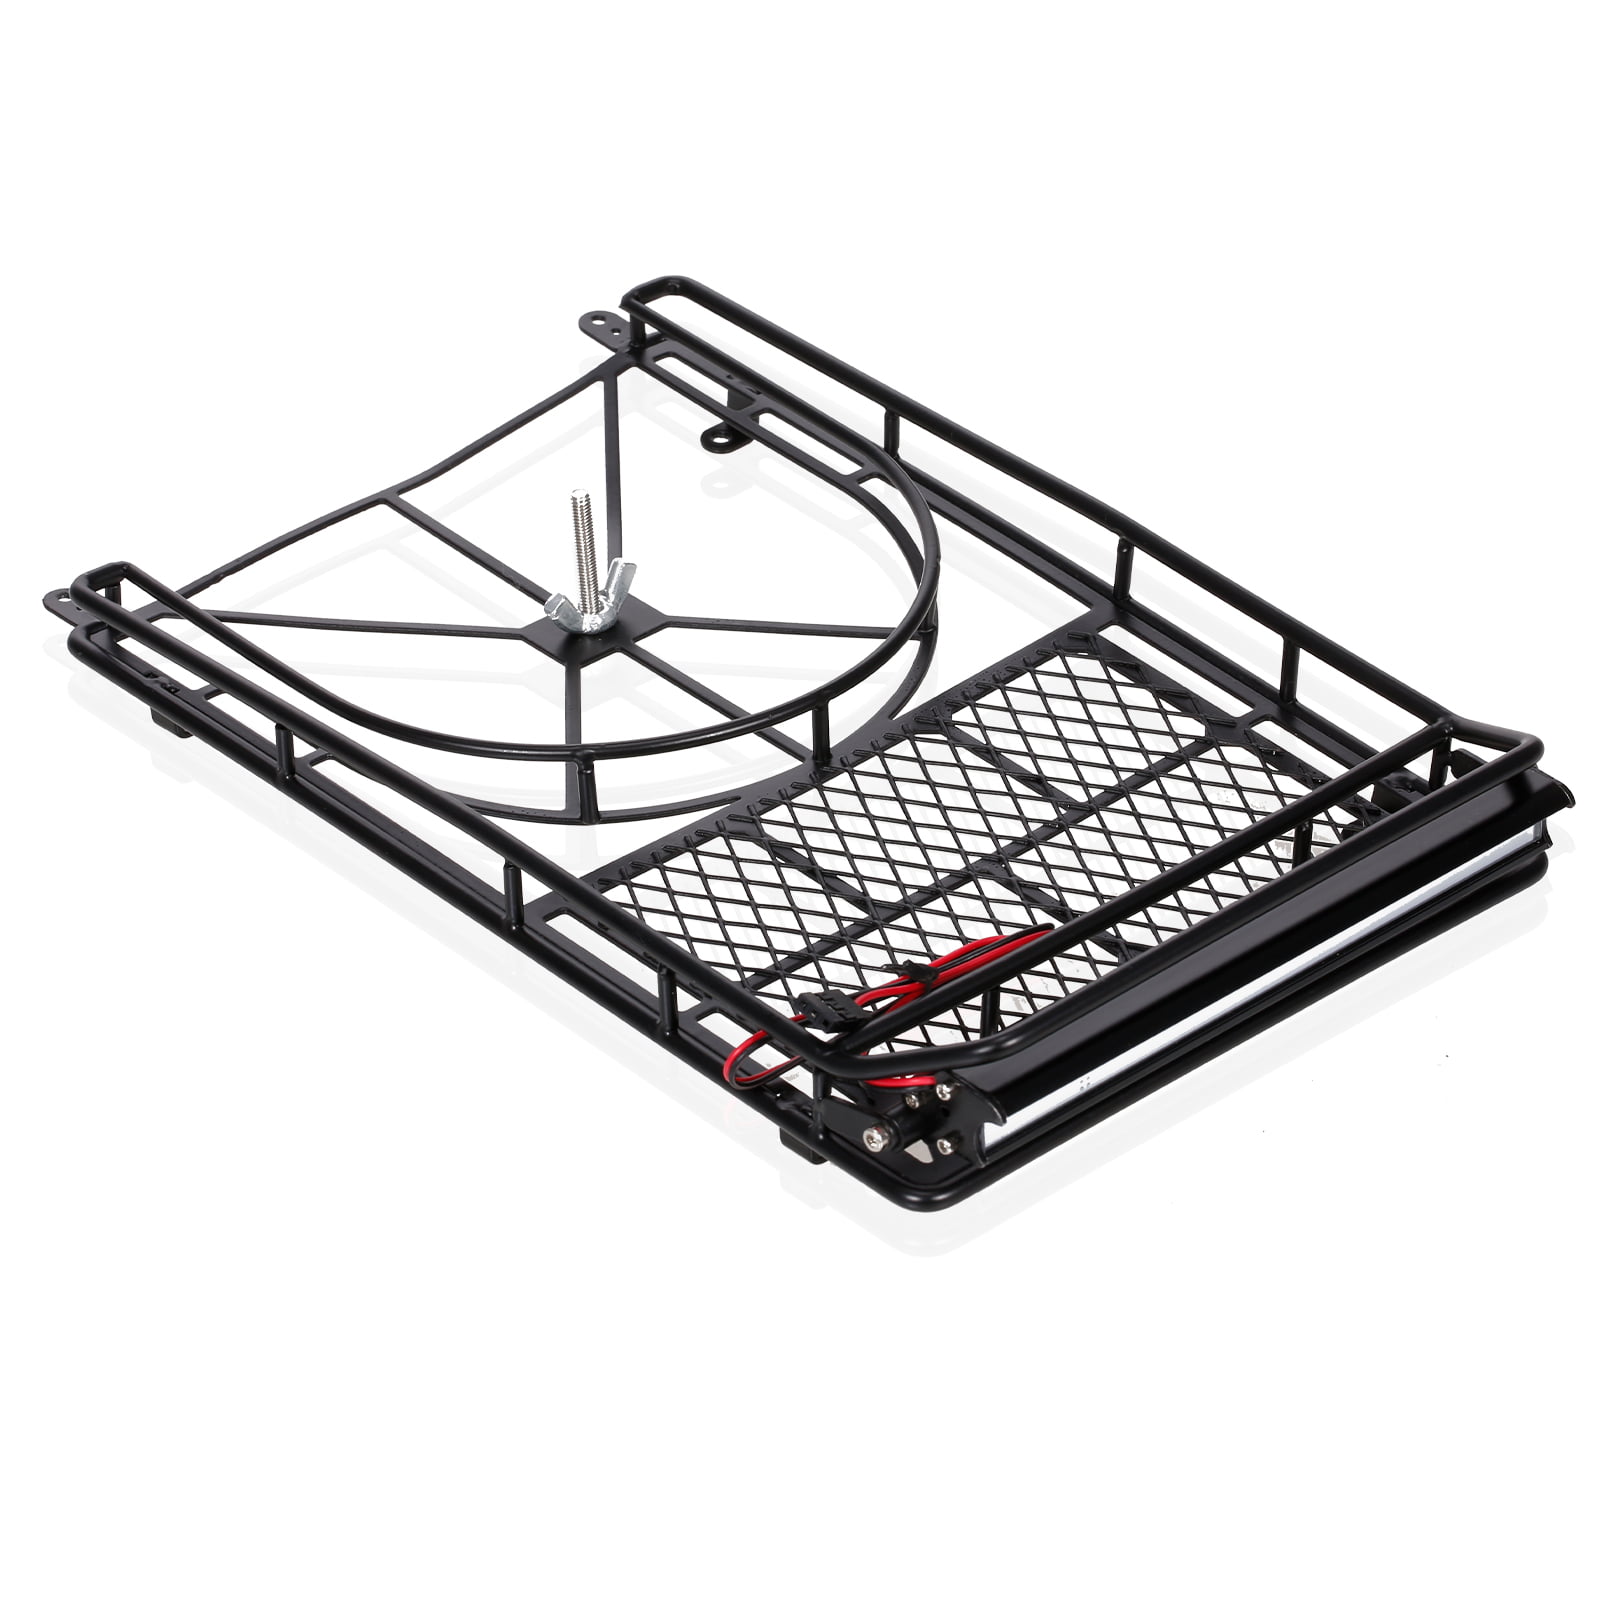 1/10 RC Metal luggage roof rack w/ led light bar For RC 4WD Axial Crawler Truck 